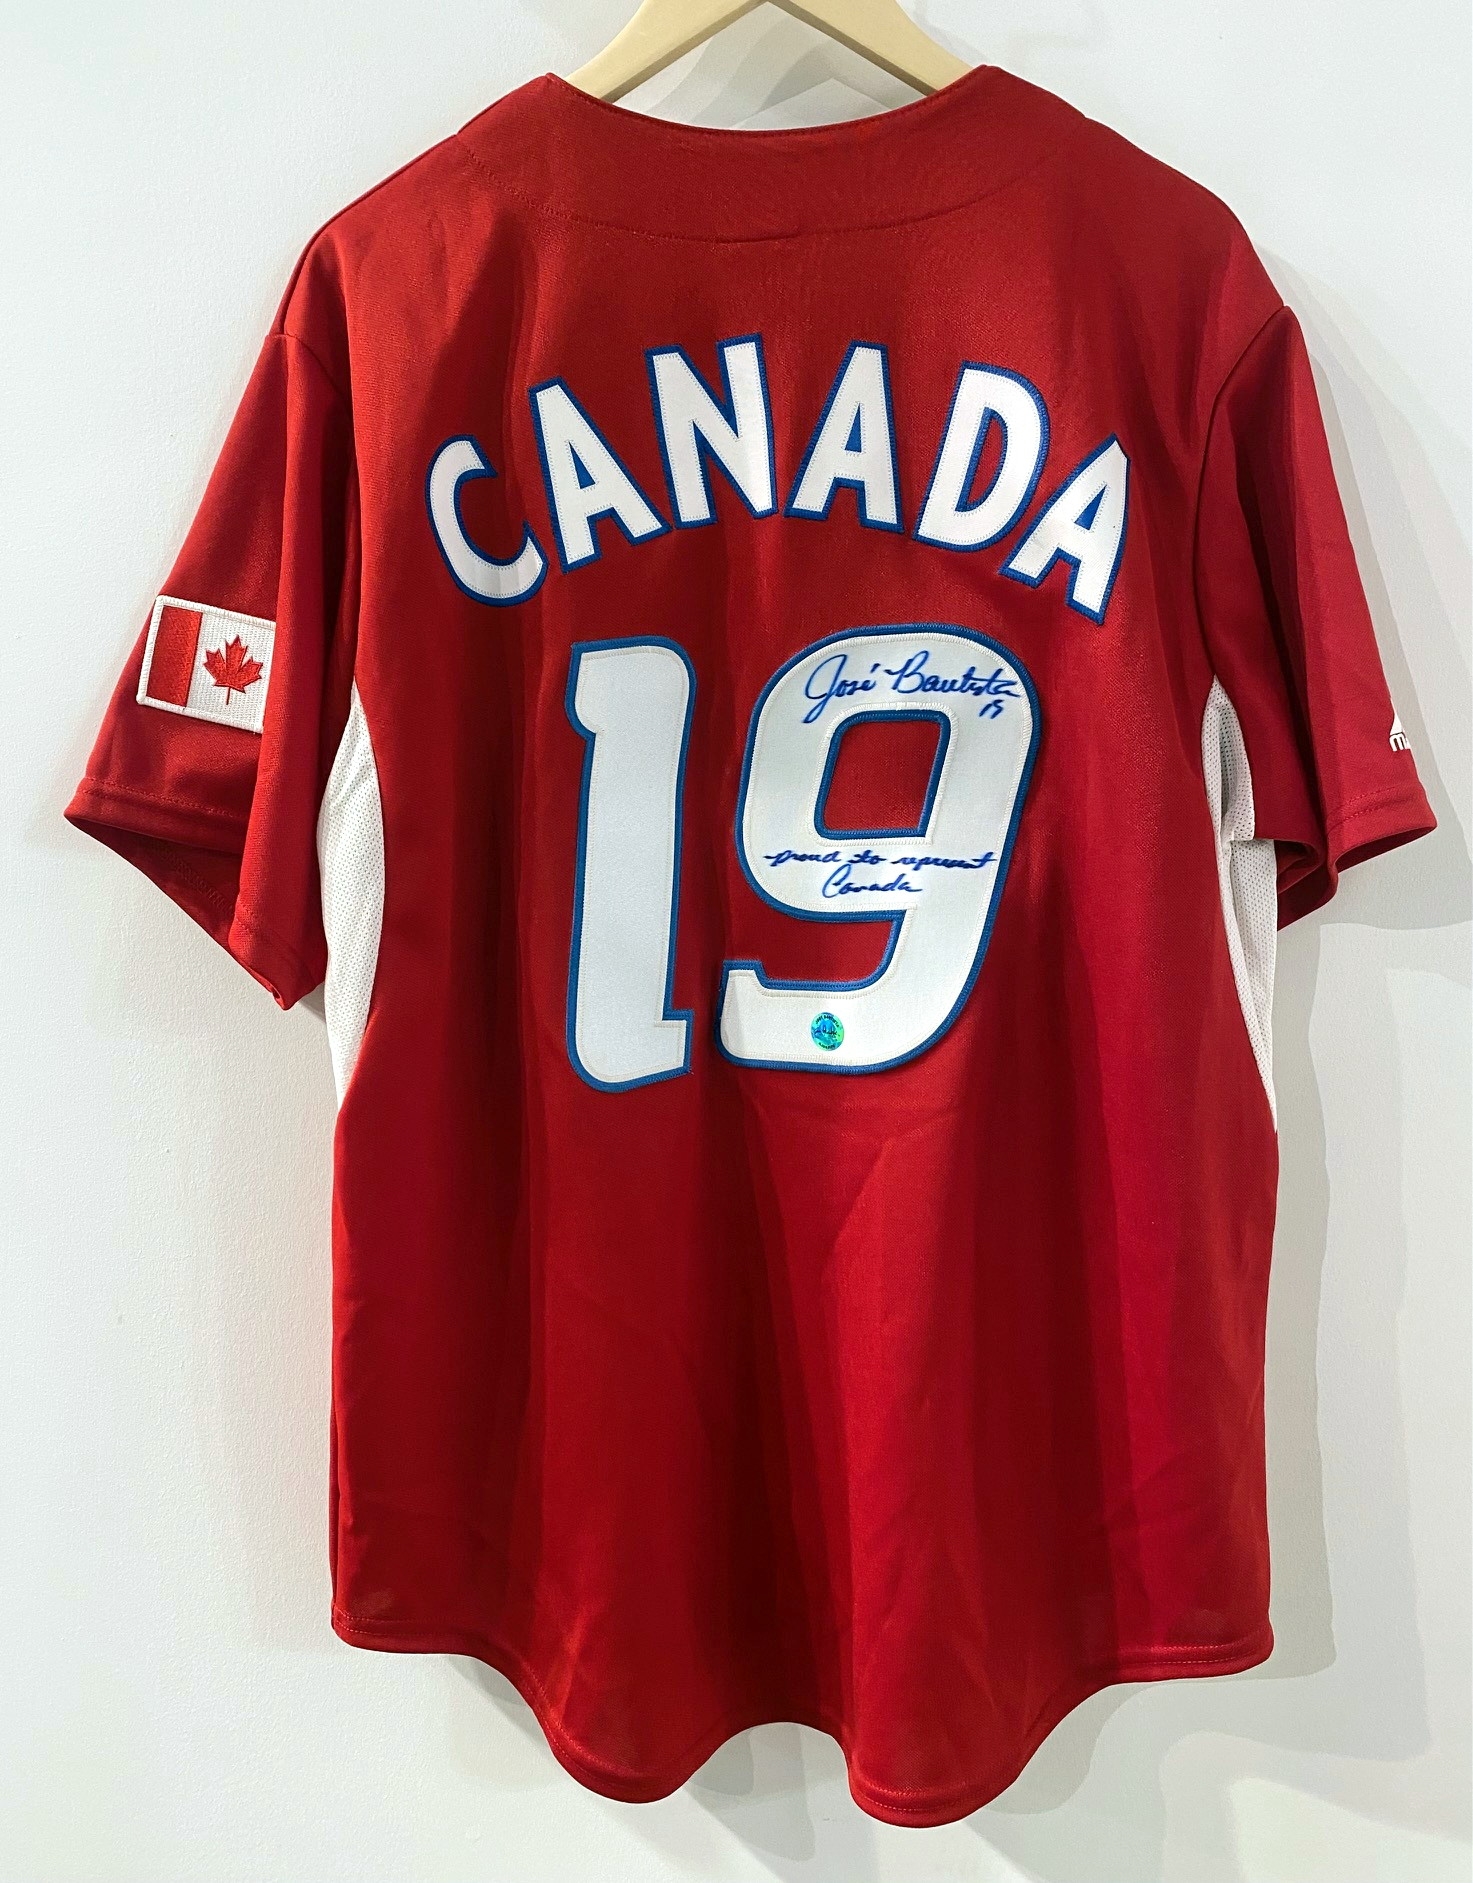 Jose Bautista Toronto Blue Jays Signed 2011 Canada Day Majestic Jersey with proud to represent Canada Note